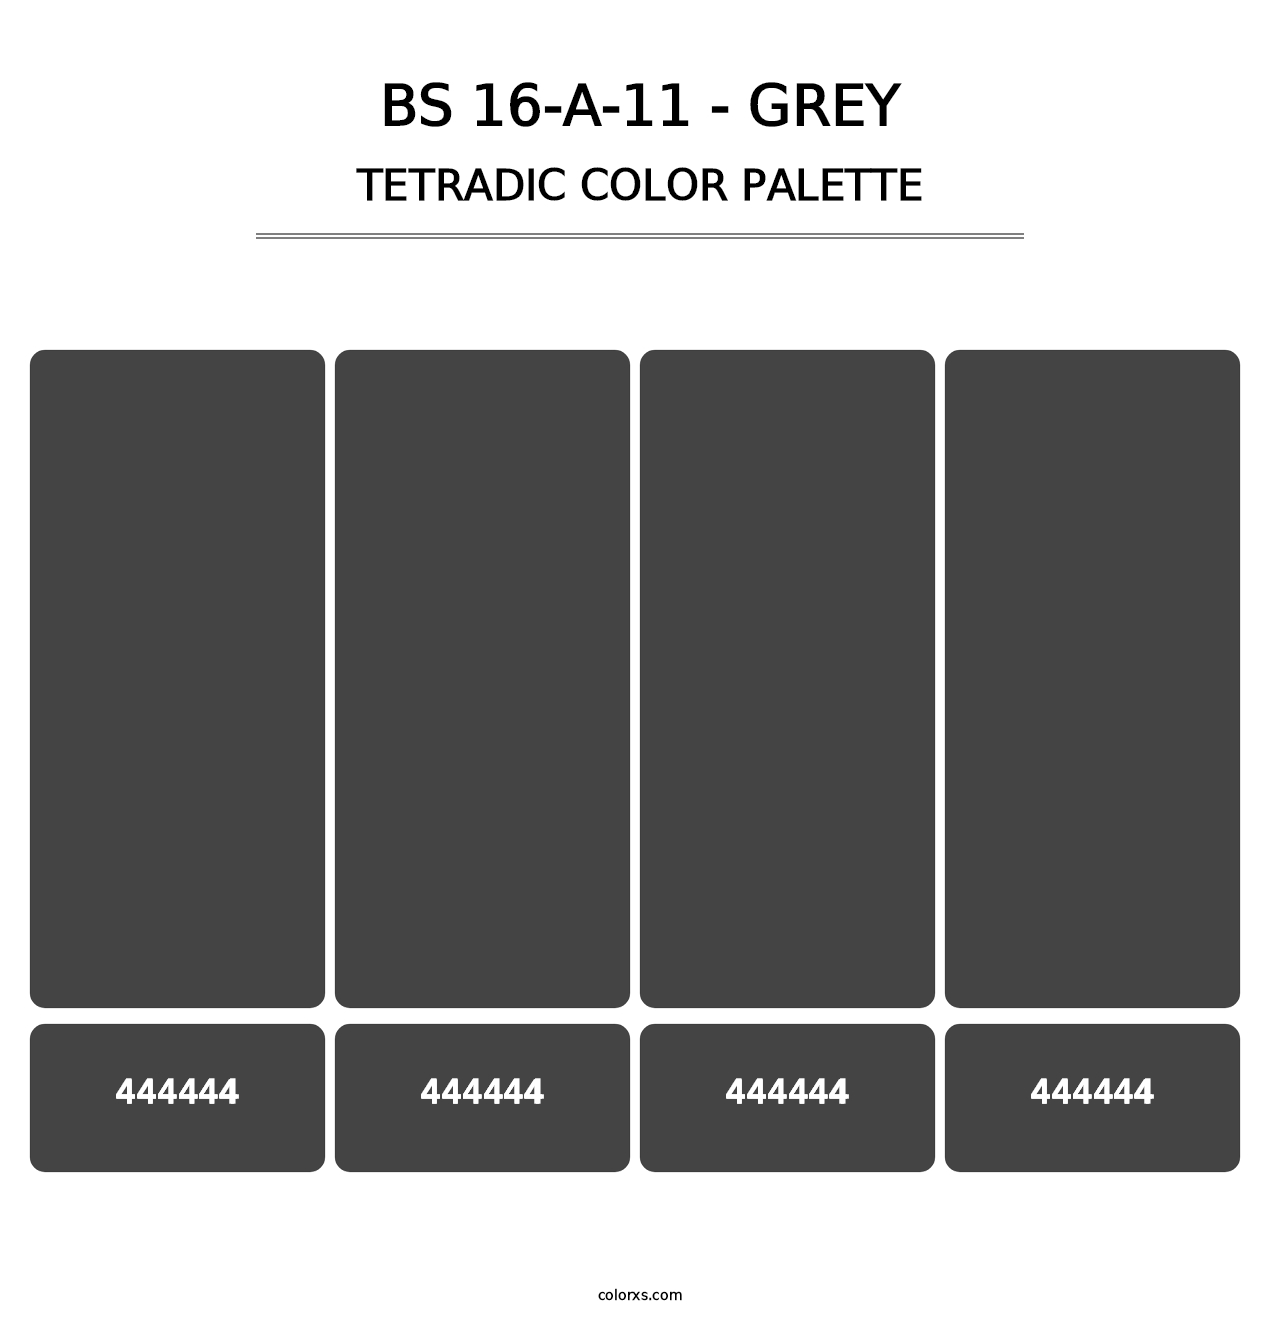 BS 16-A-11 - Grey - Tetradic Color Palette